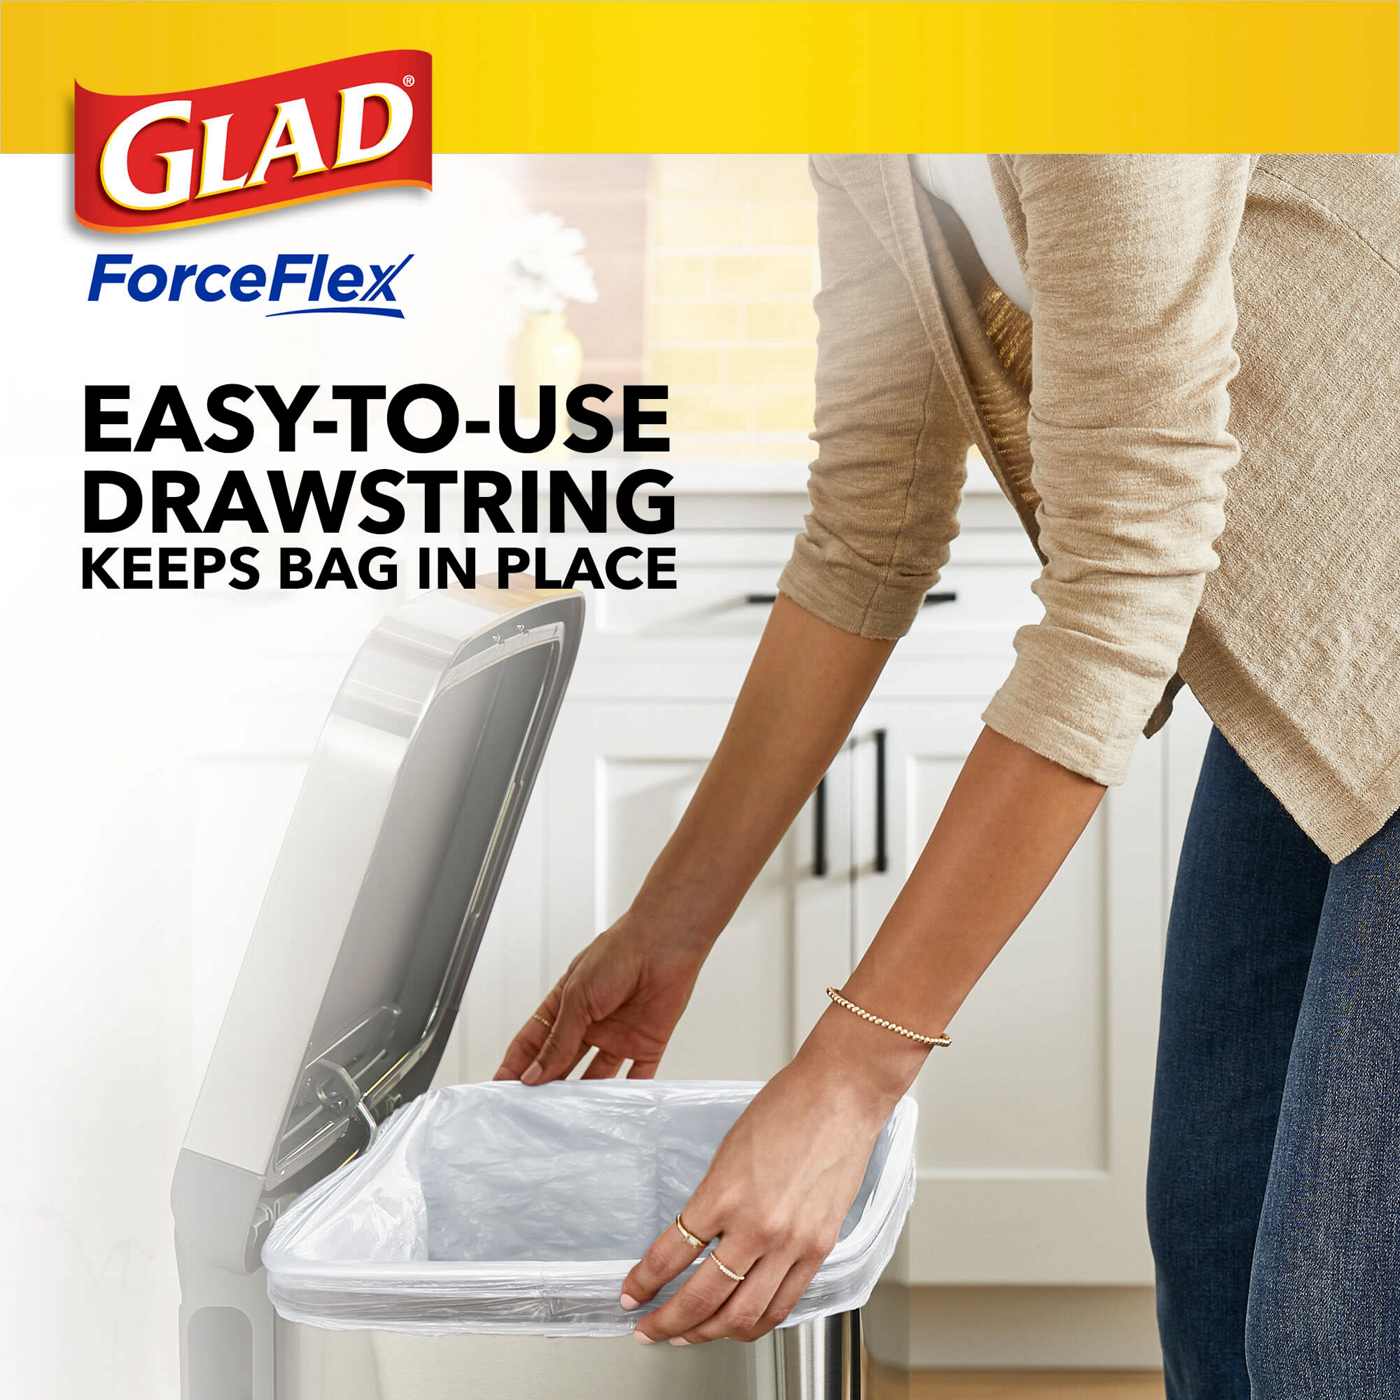 Glad ForceFlex Tall Kitchen Drawstring Trash Bags, 13 Gallon - Fresh Clean Scent with Febreeze Freshness; image 6 of 9